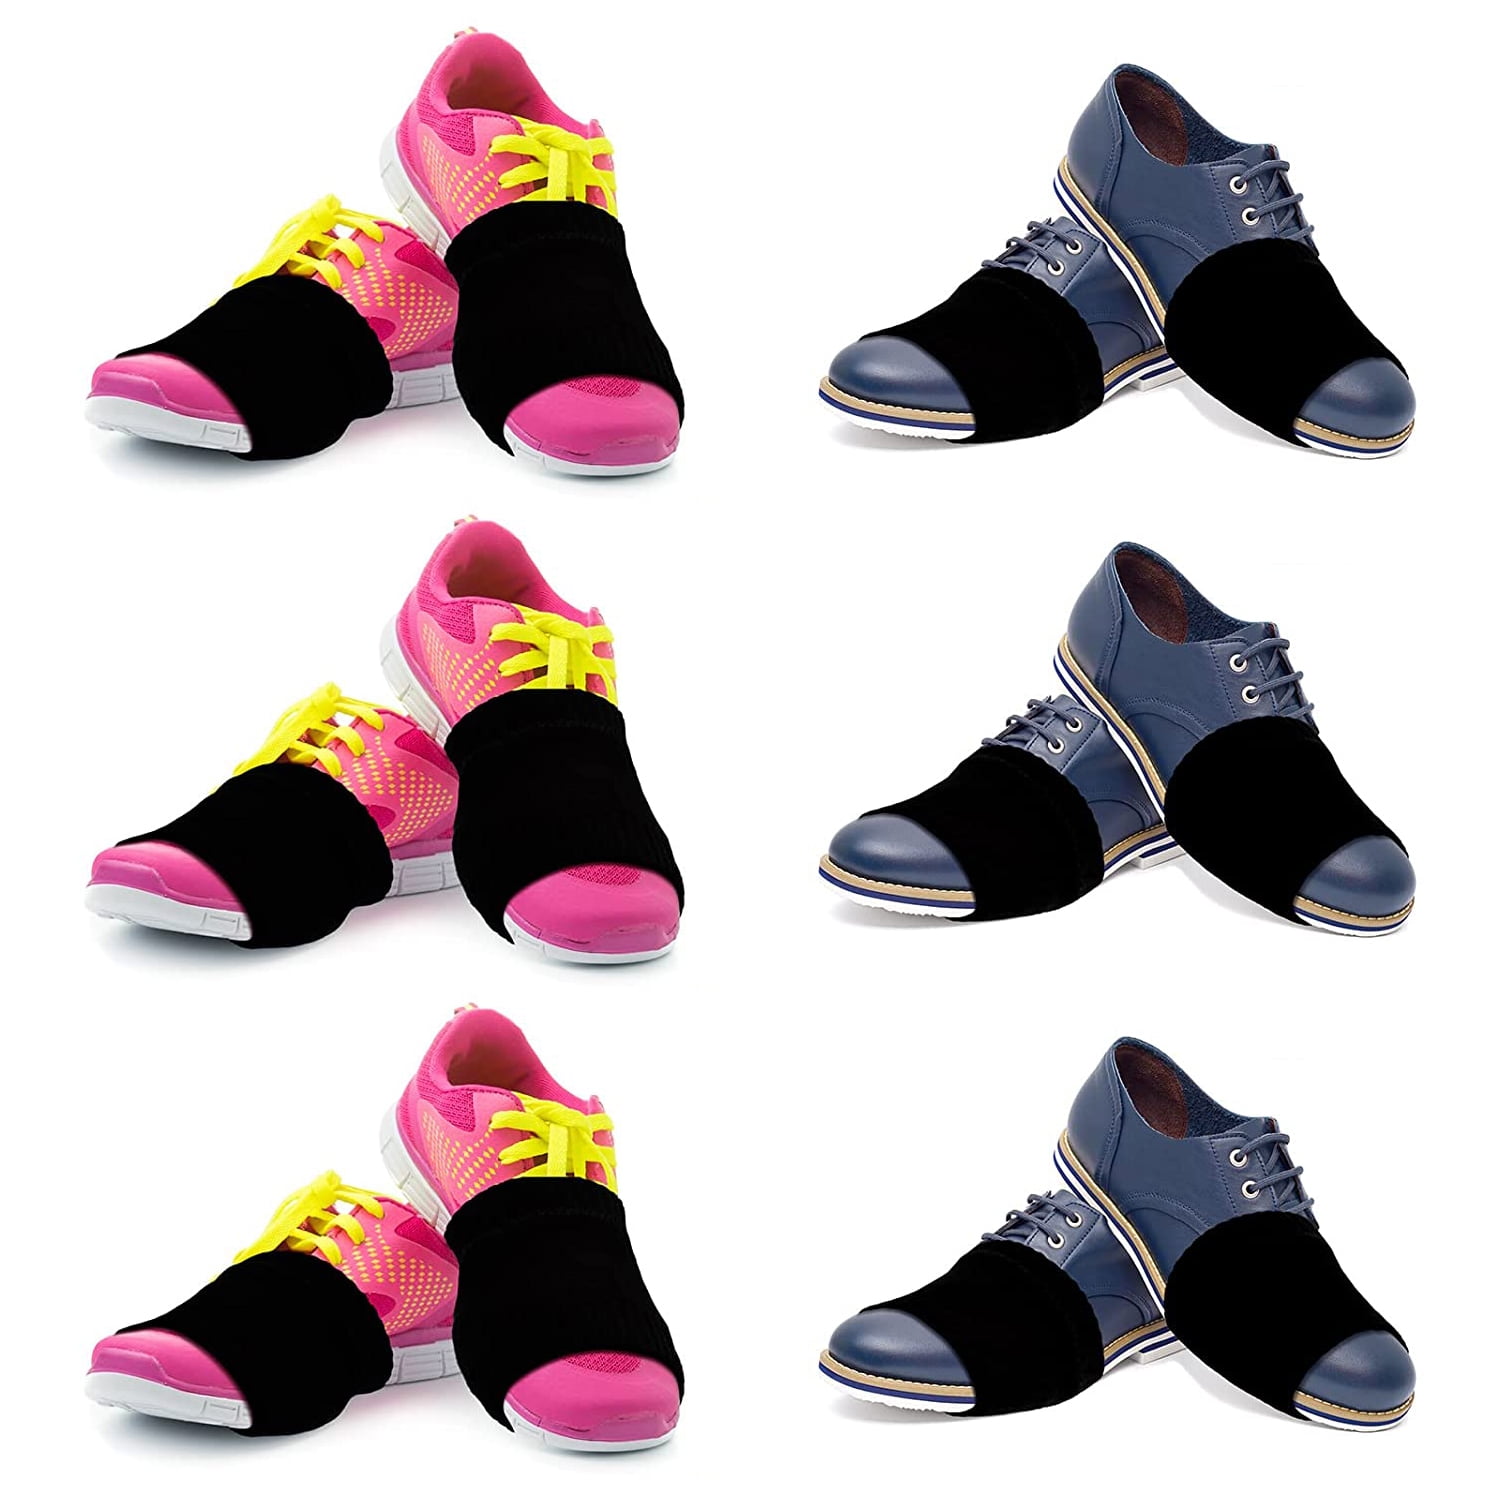 Easy to Protect Knees TTY Socks and Sneakers Dancing on Smooth floorShoes Dancing on Floor-Fitness and Linear Dancing Shoe Covers Rotate and Glide